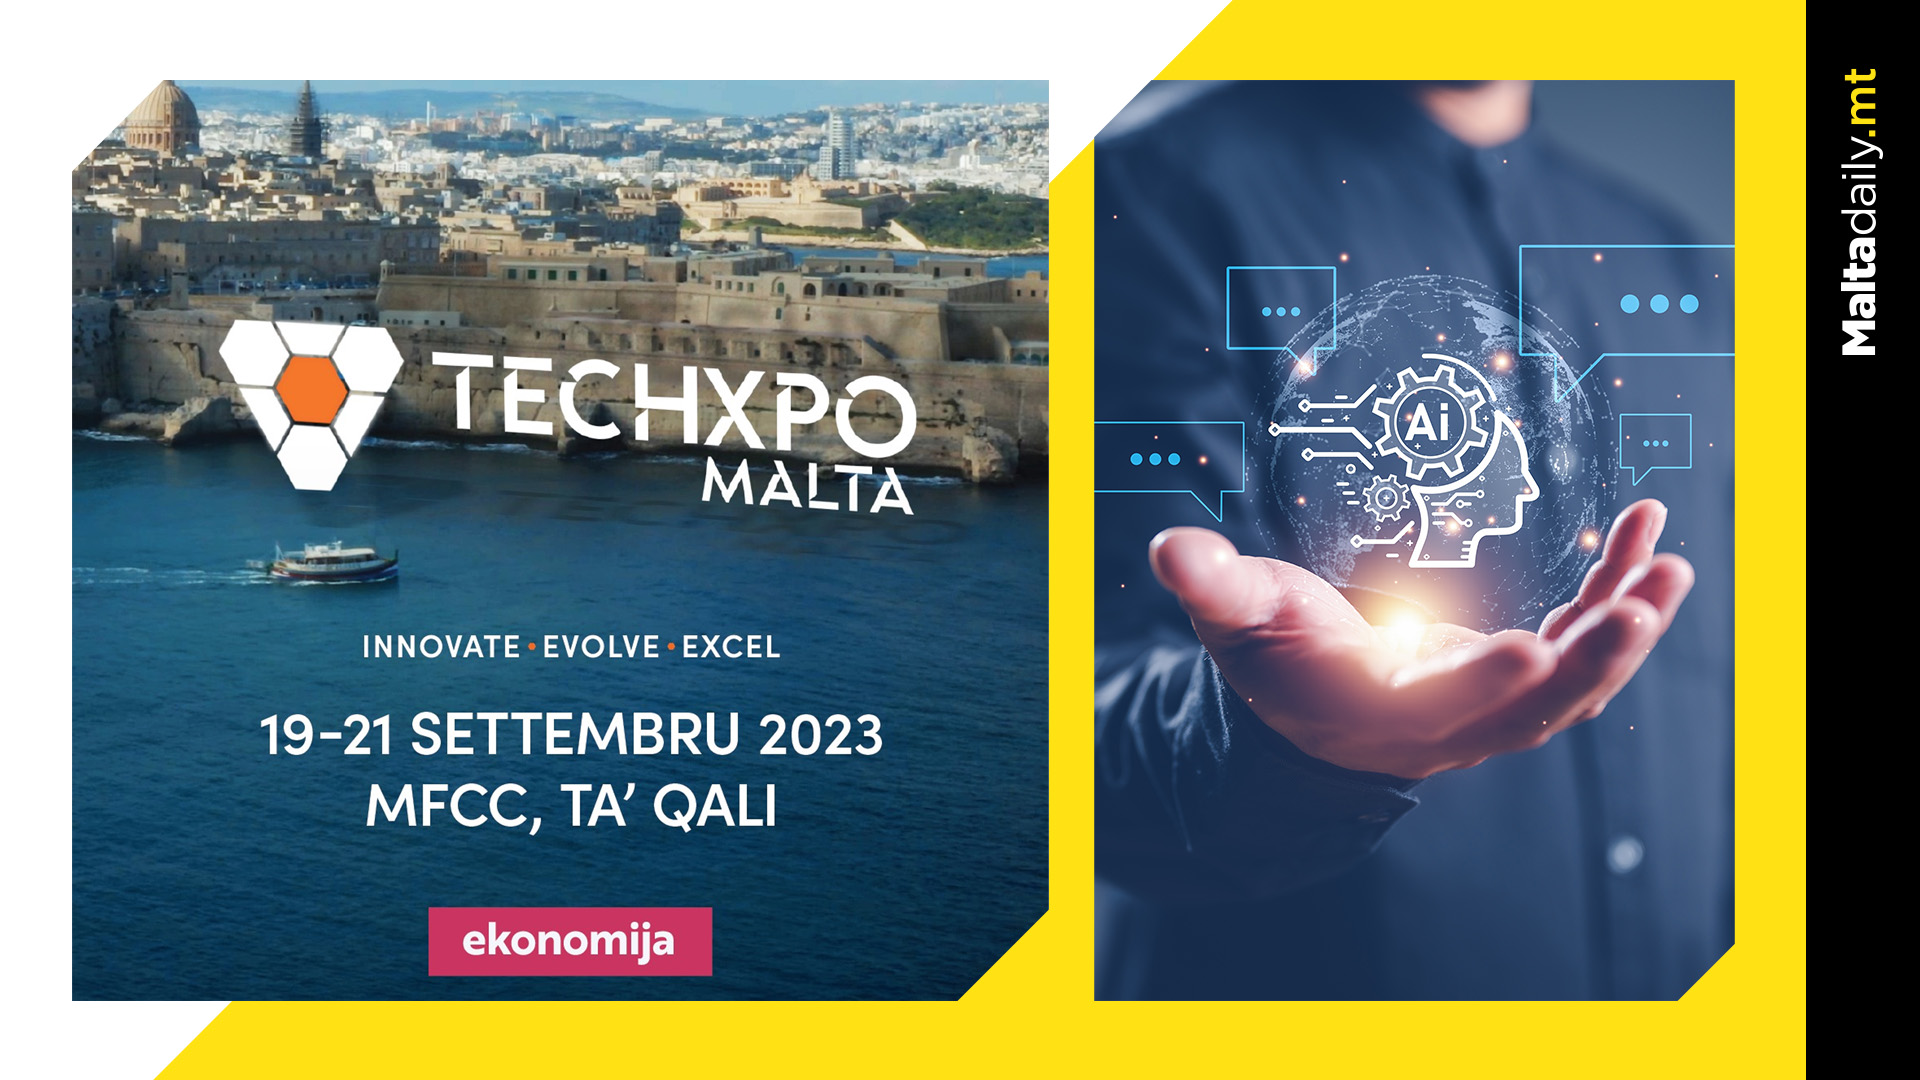 Malta Takes Center Stage Hosting A Groundbreaking Technology Expo